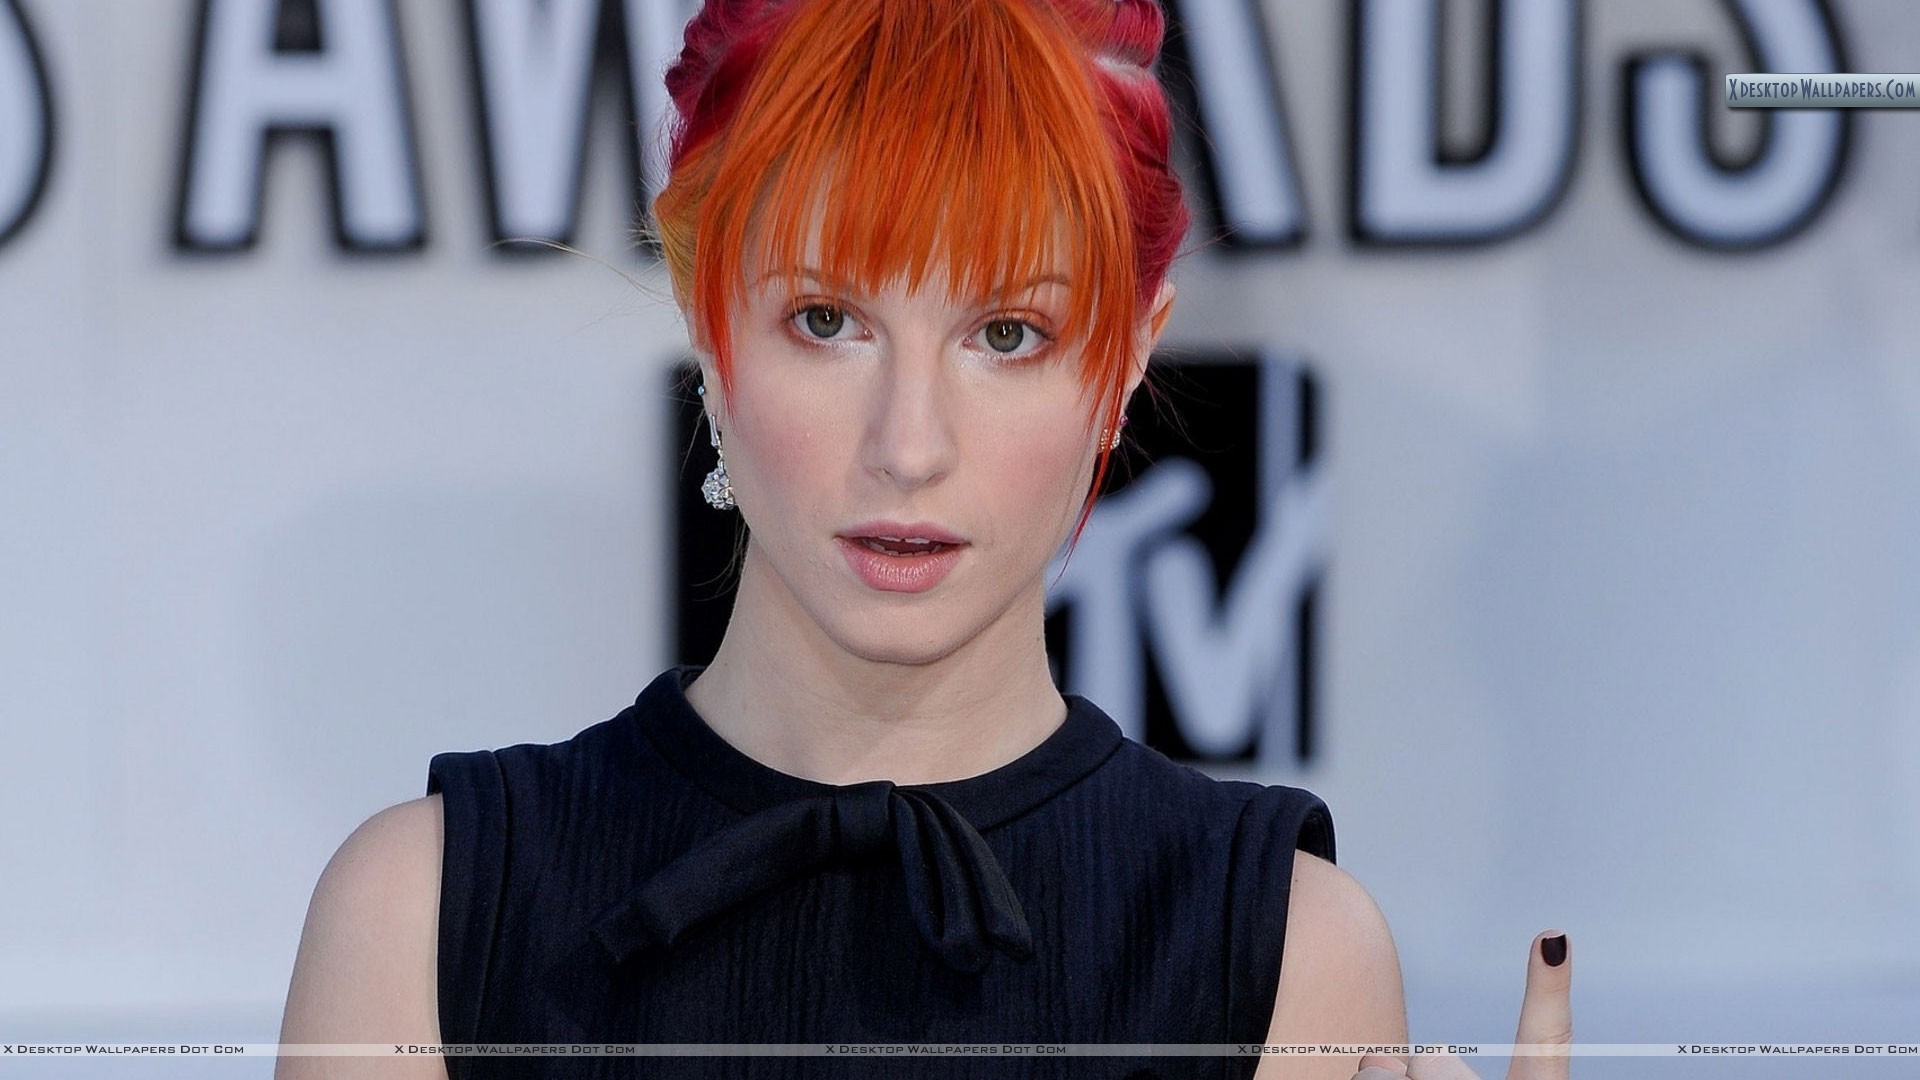 1920x1080 You are viewing wallpaper titled "Hayley Williams ...